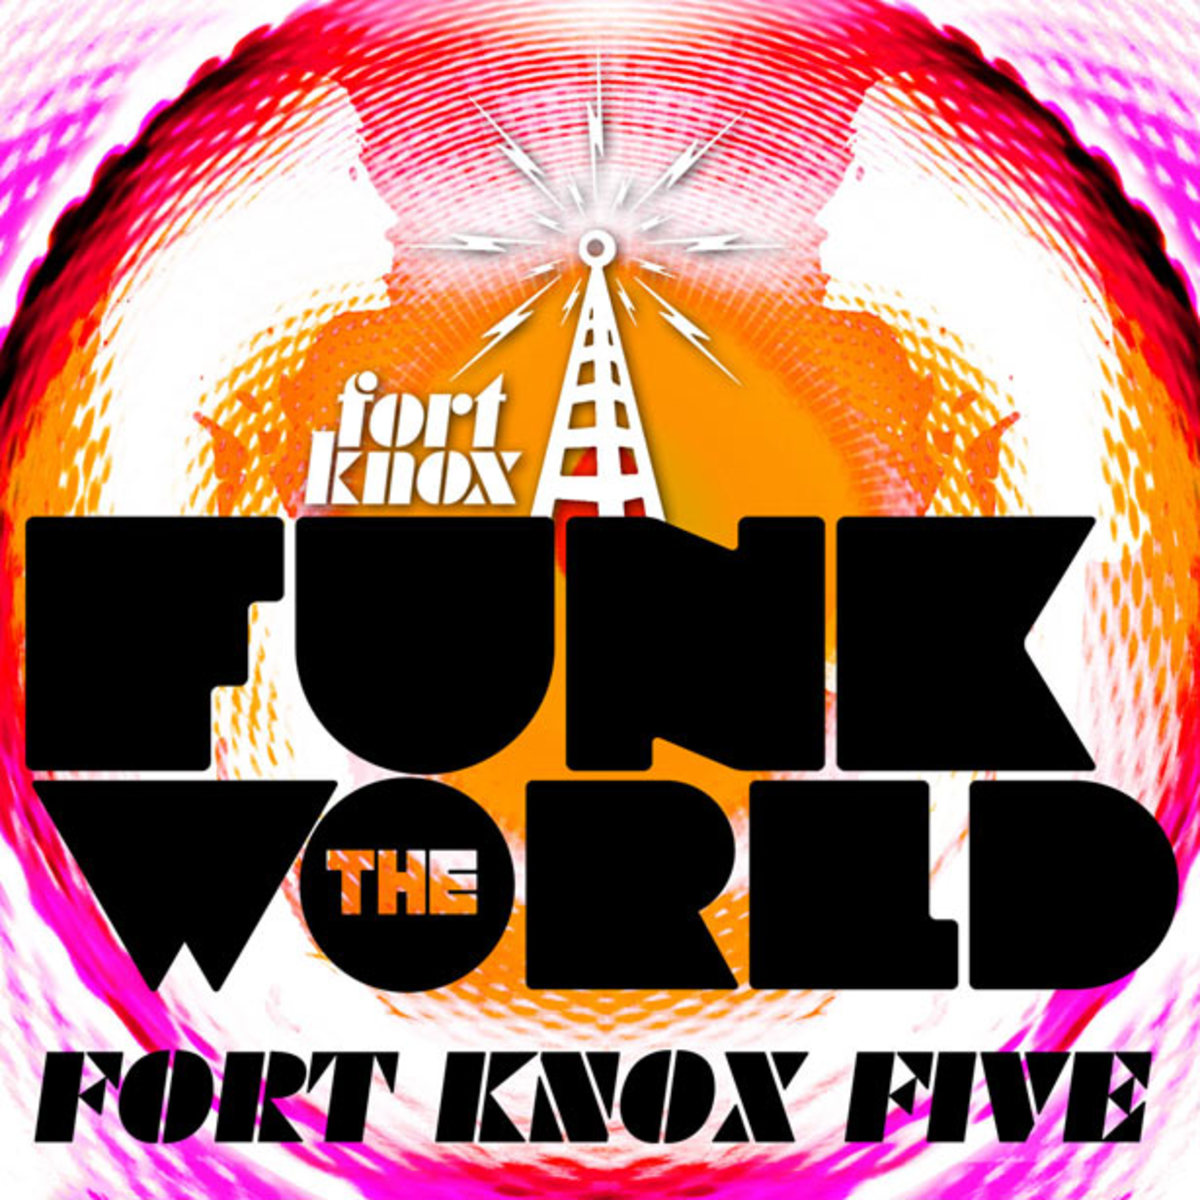 Exclusive Premiere: "Funk The World" by Fort Knox Five